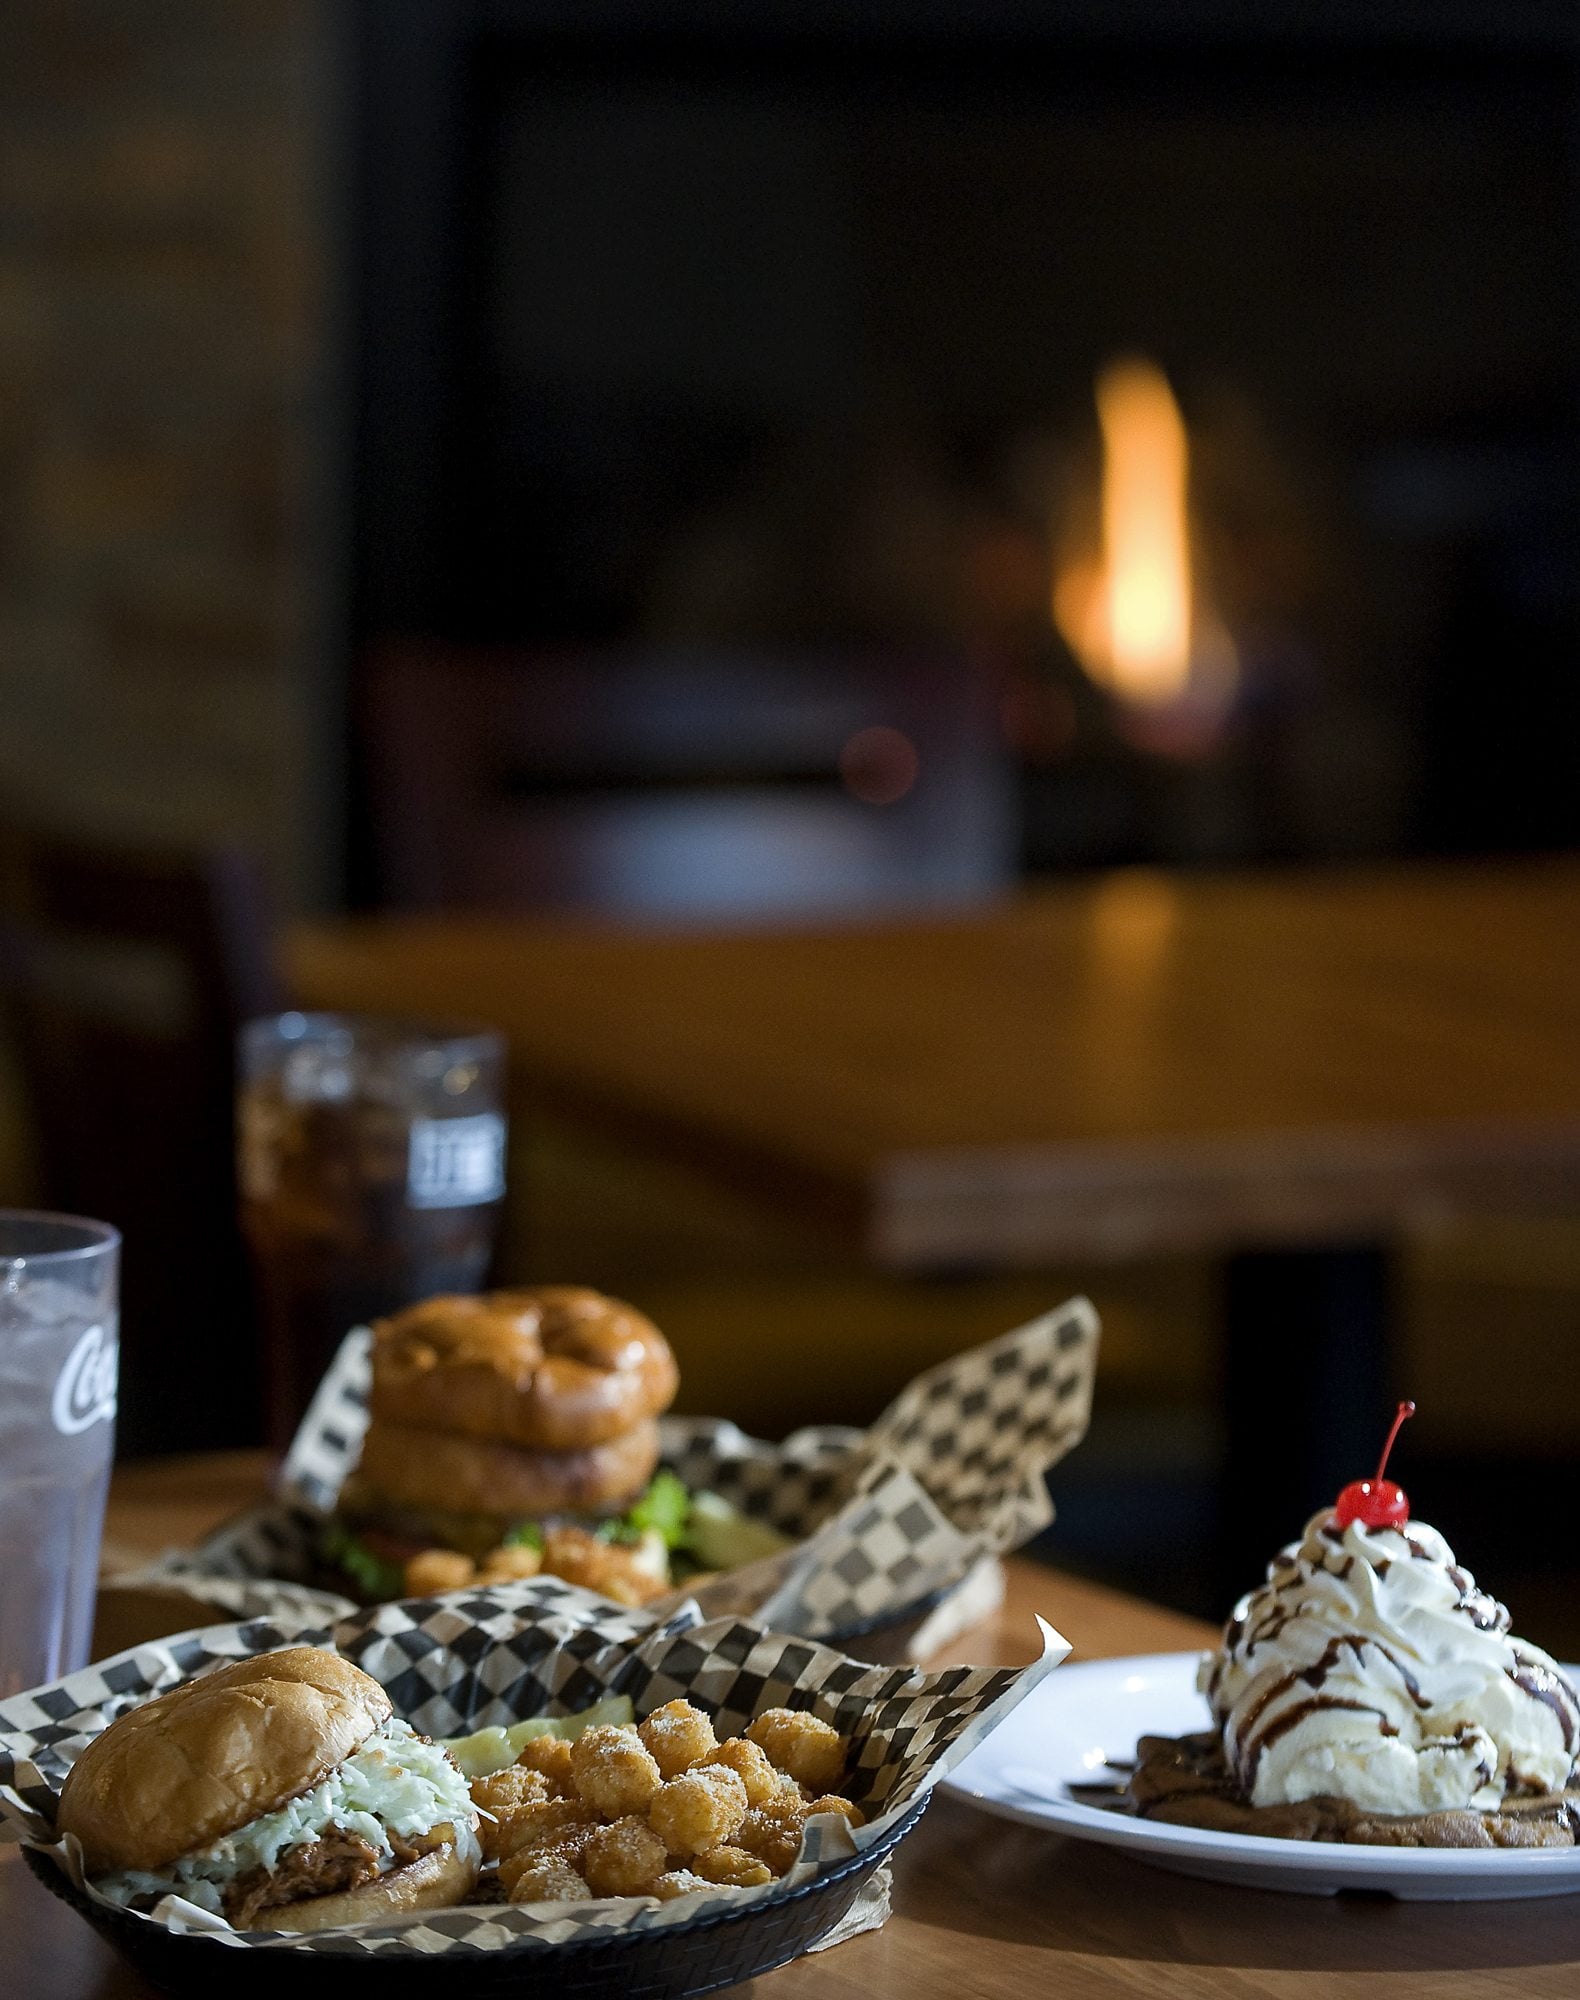 The Kahlua Pulled Pork sandwich goes well with Rosemary Parmesan tater tots, and the Hickory burger, background, is one of the most popular items on Brothers' menu. The Meltdown, a rich and filling dessert, is big enough to share.